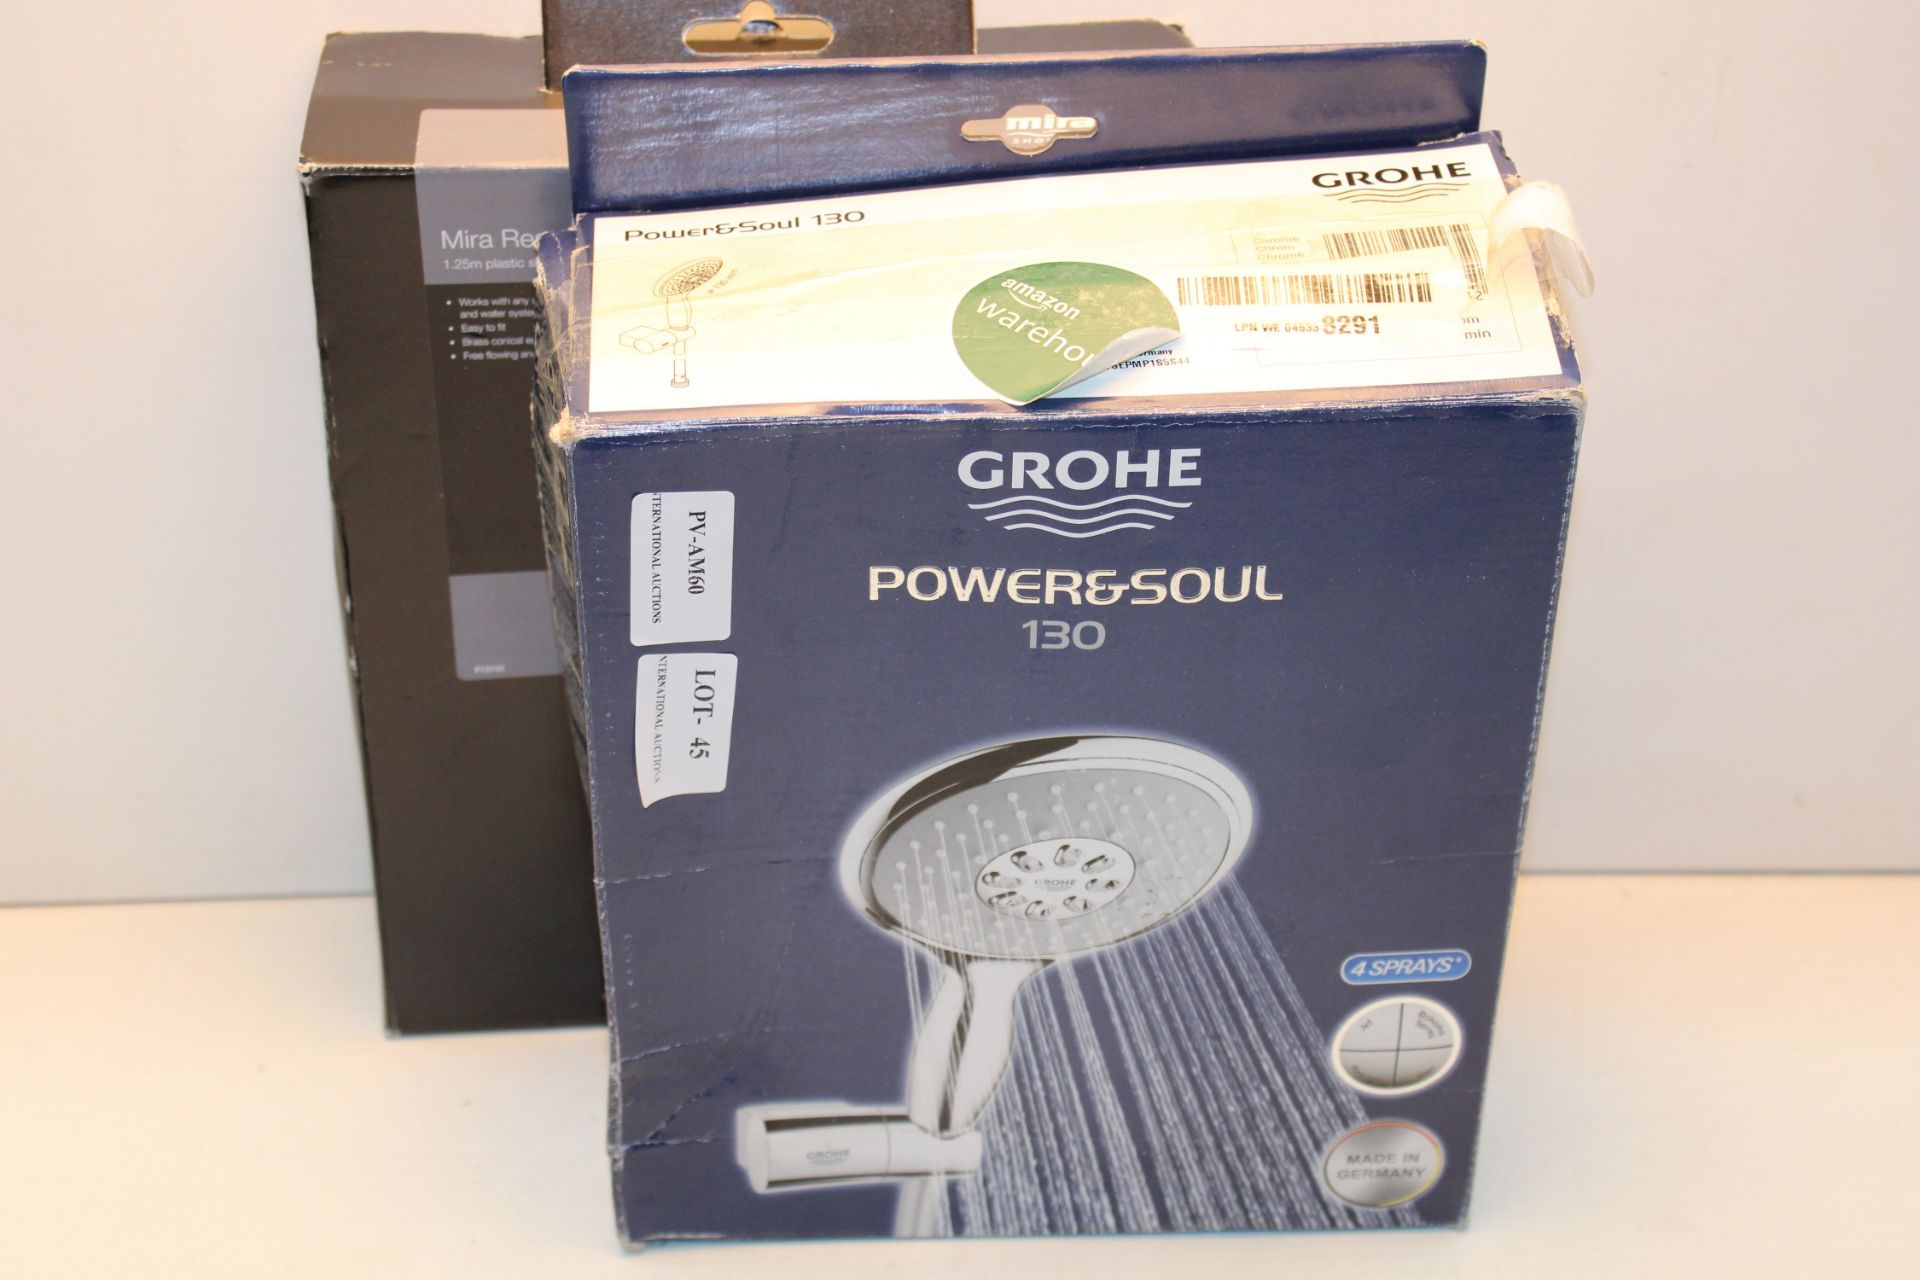 BOXED GROHE POWER & SOUL 130 SHOWER SET RRP £67.95Condition ReportAppraisal Available on Request-